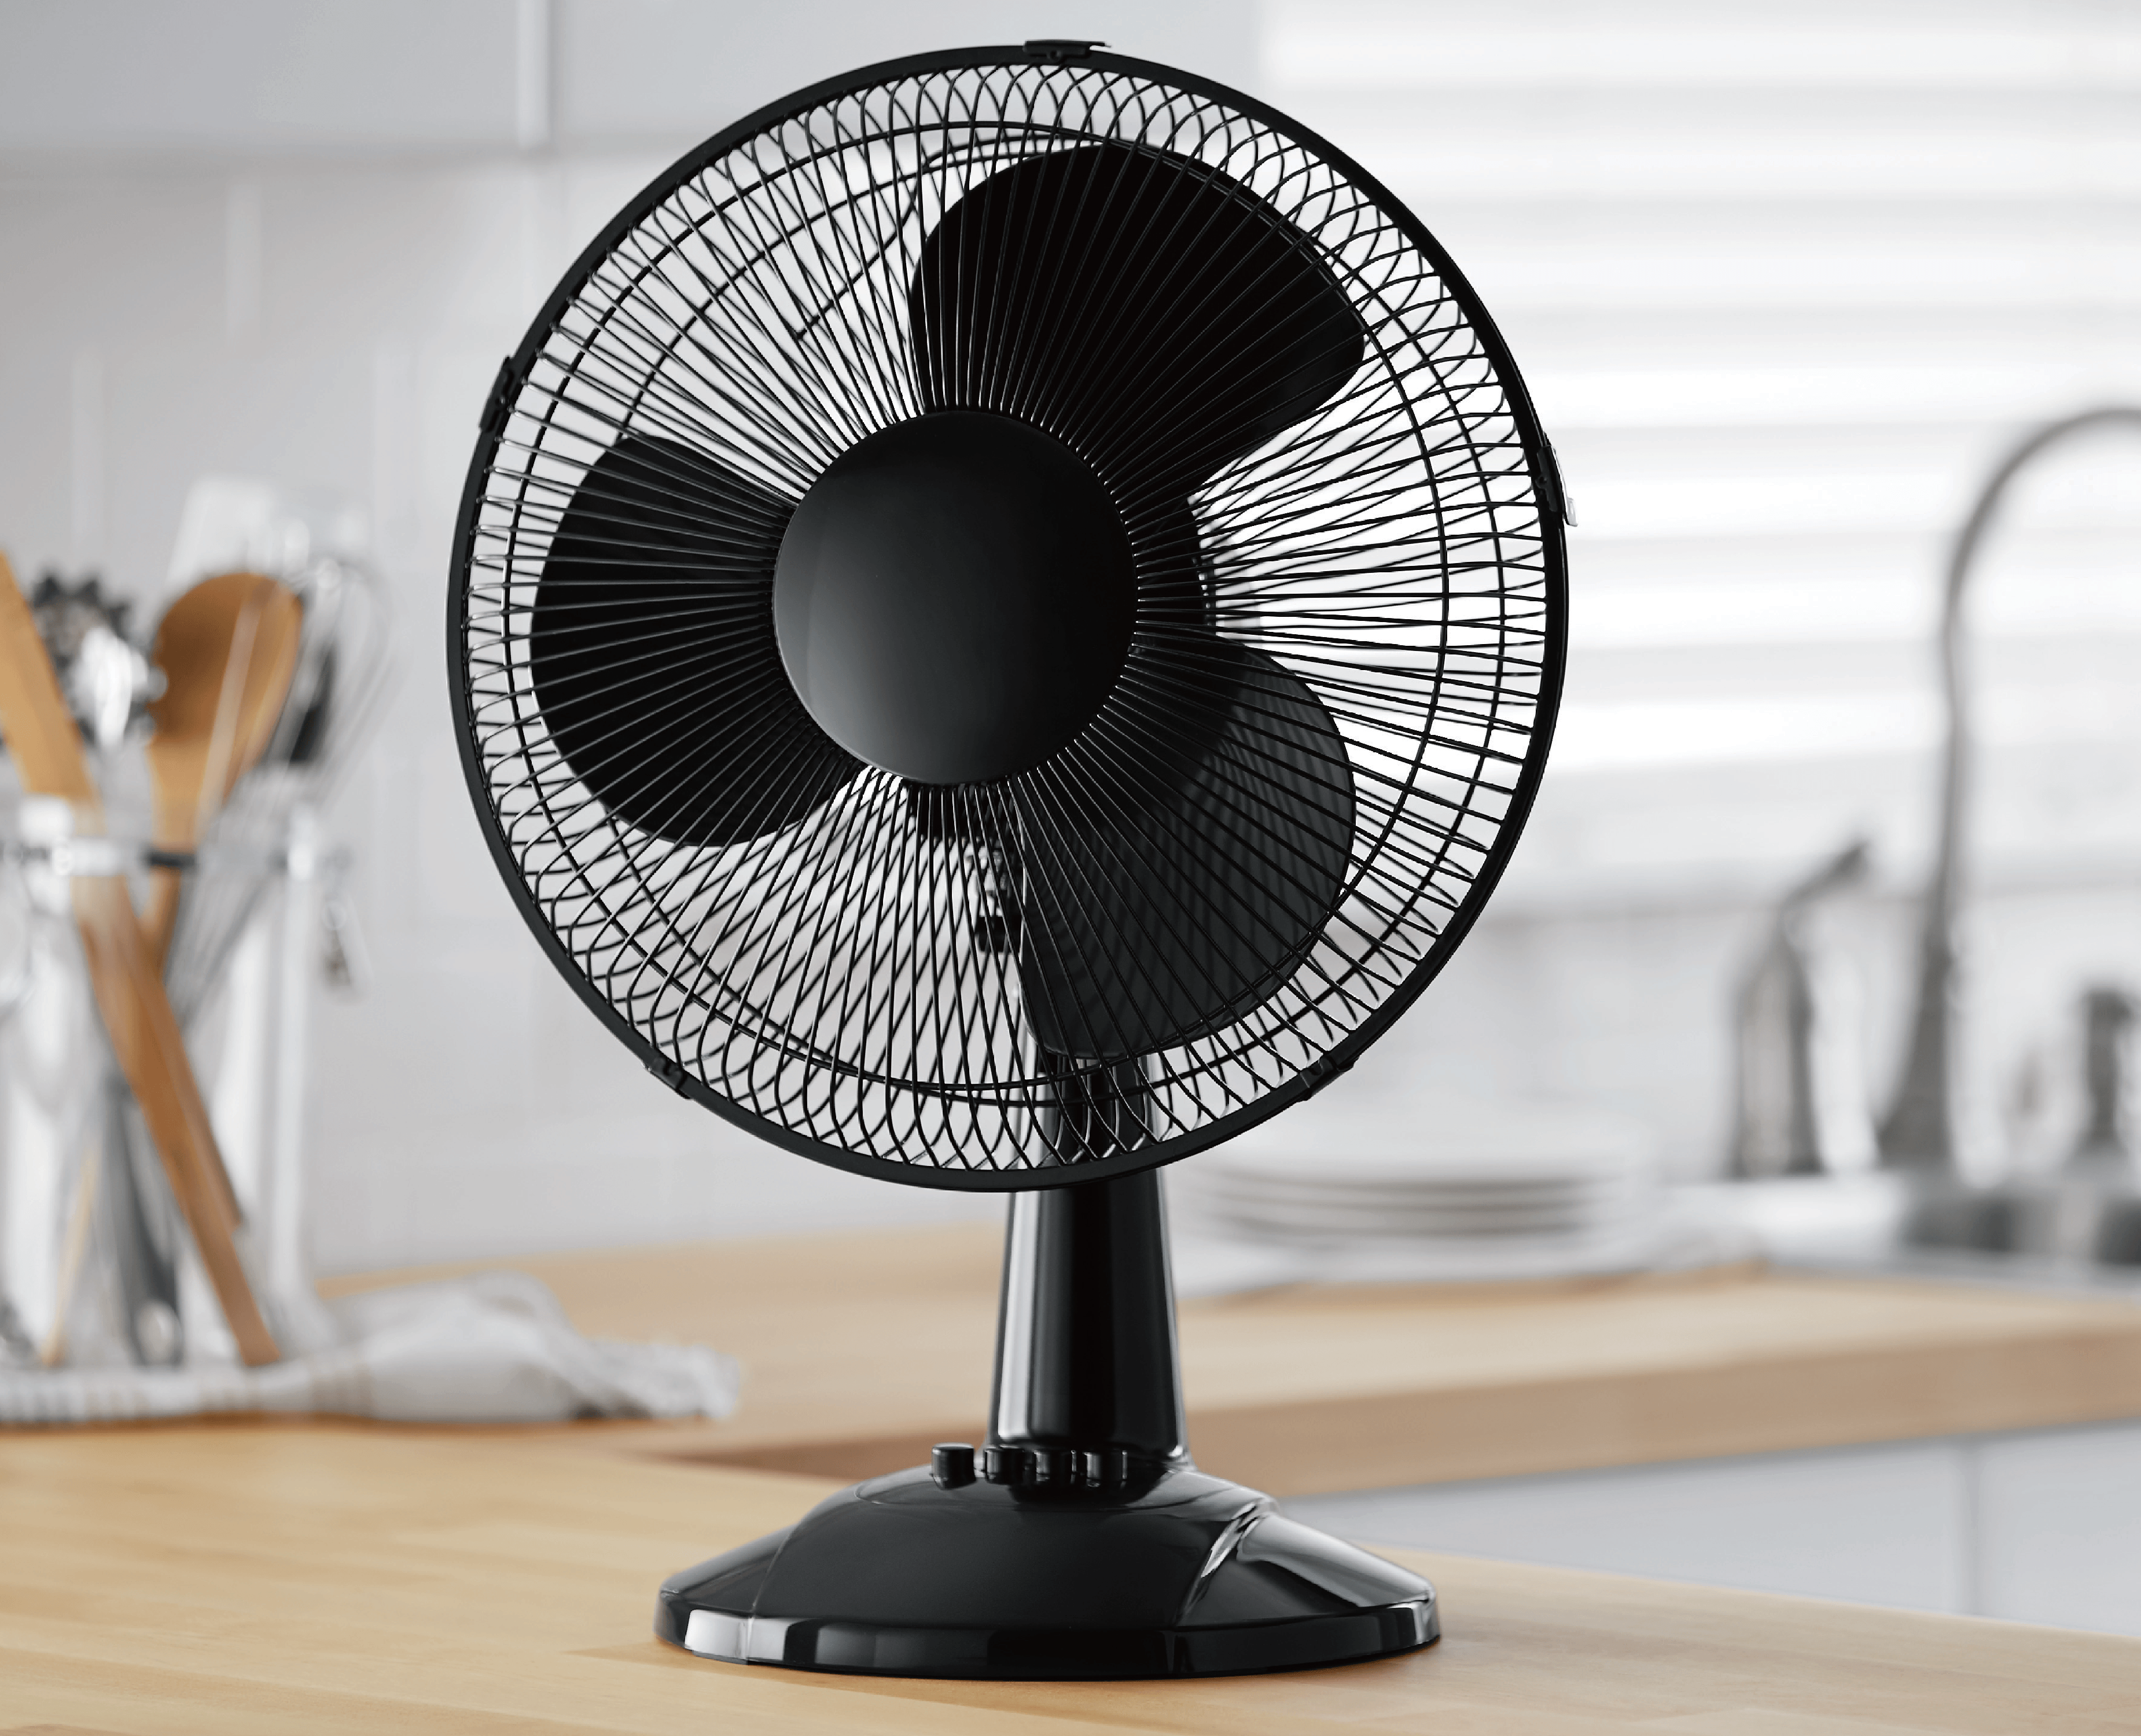 Mainstays 12" 3-Speed Oscillating Table Fan, FT30-8MBB, New, Black - image 4 of 9